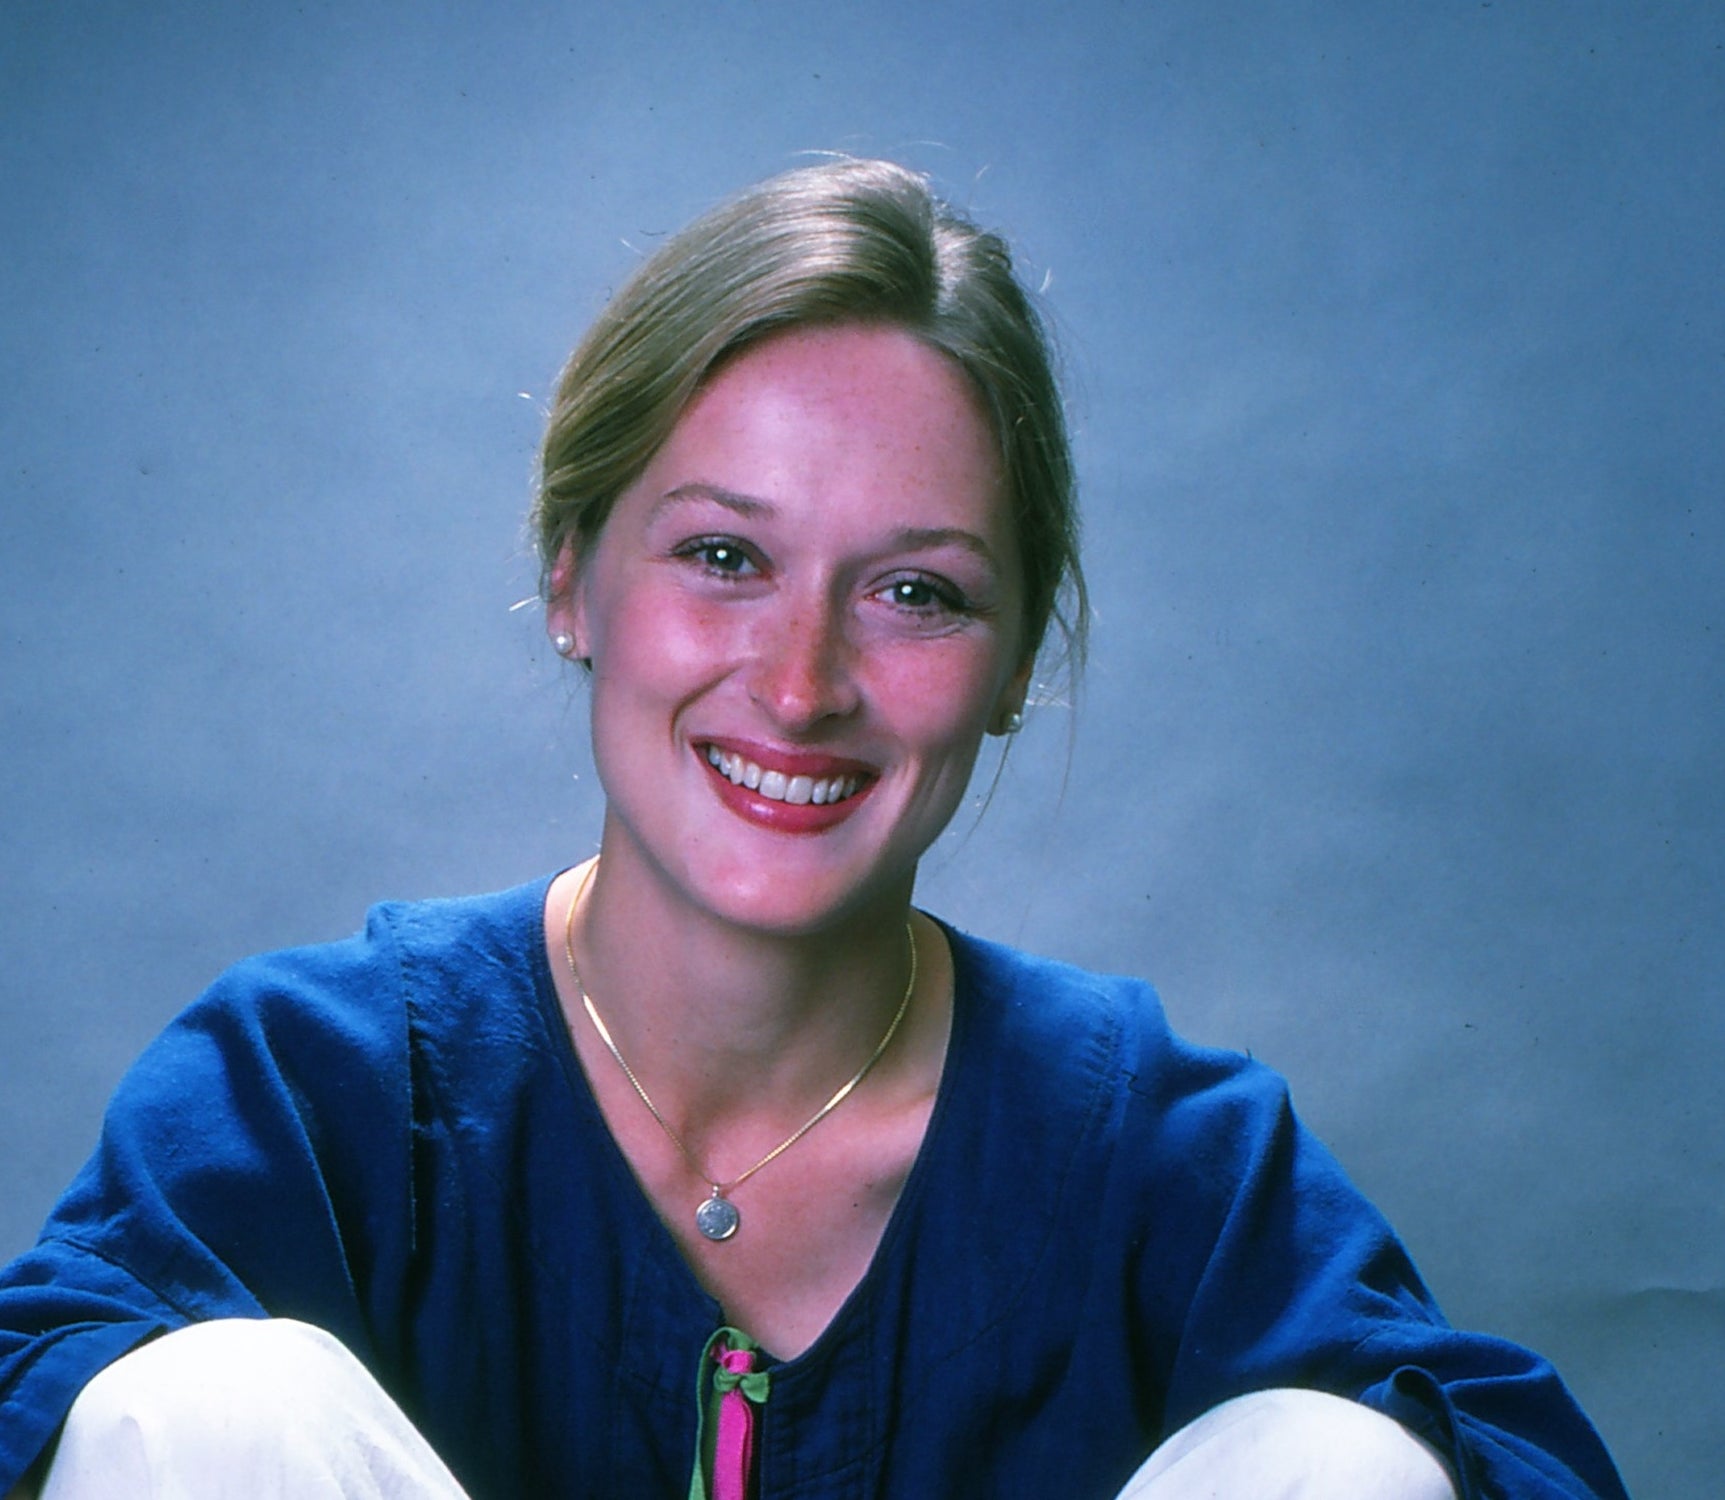 Meryl smiling in a blue top smiling towards the camera